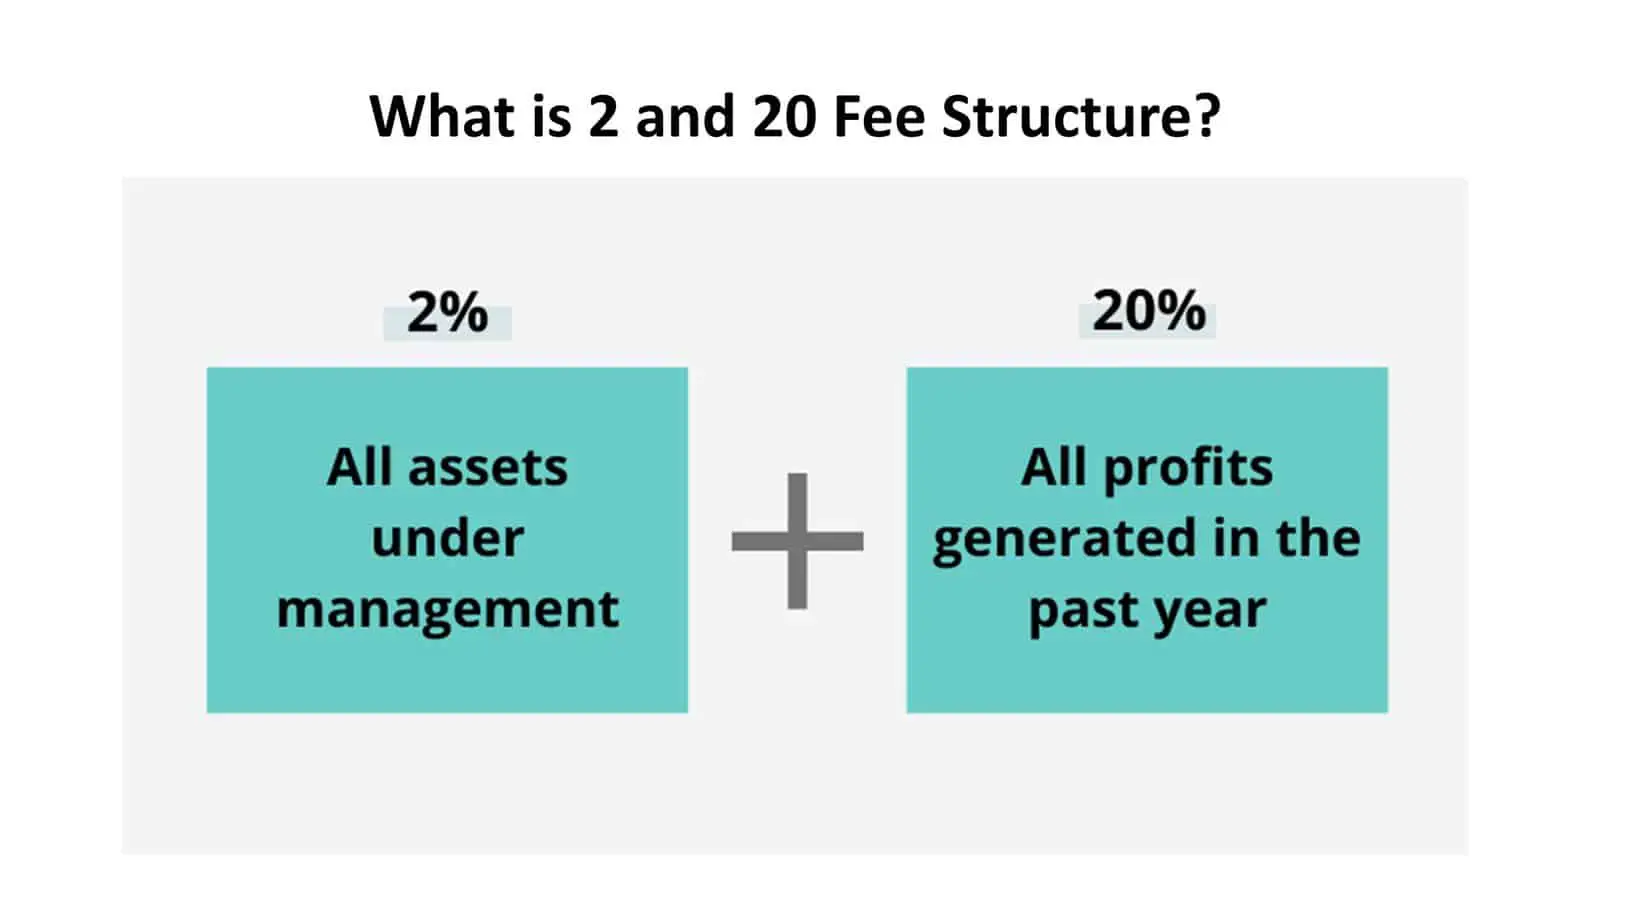 What is 2 and 20 Fee Structure